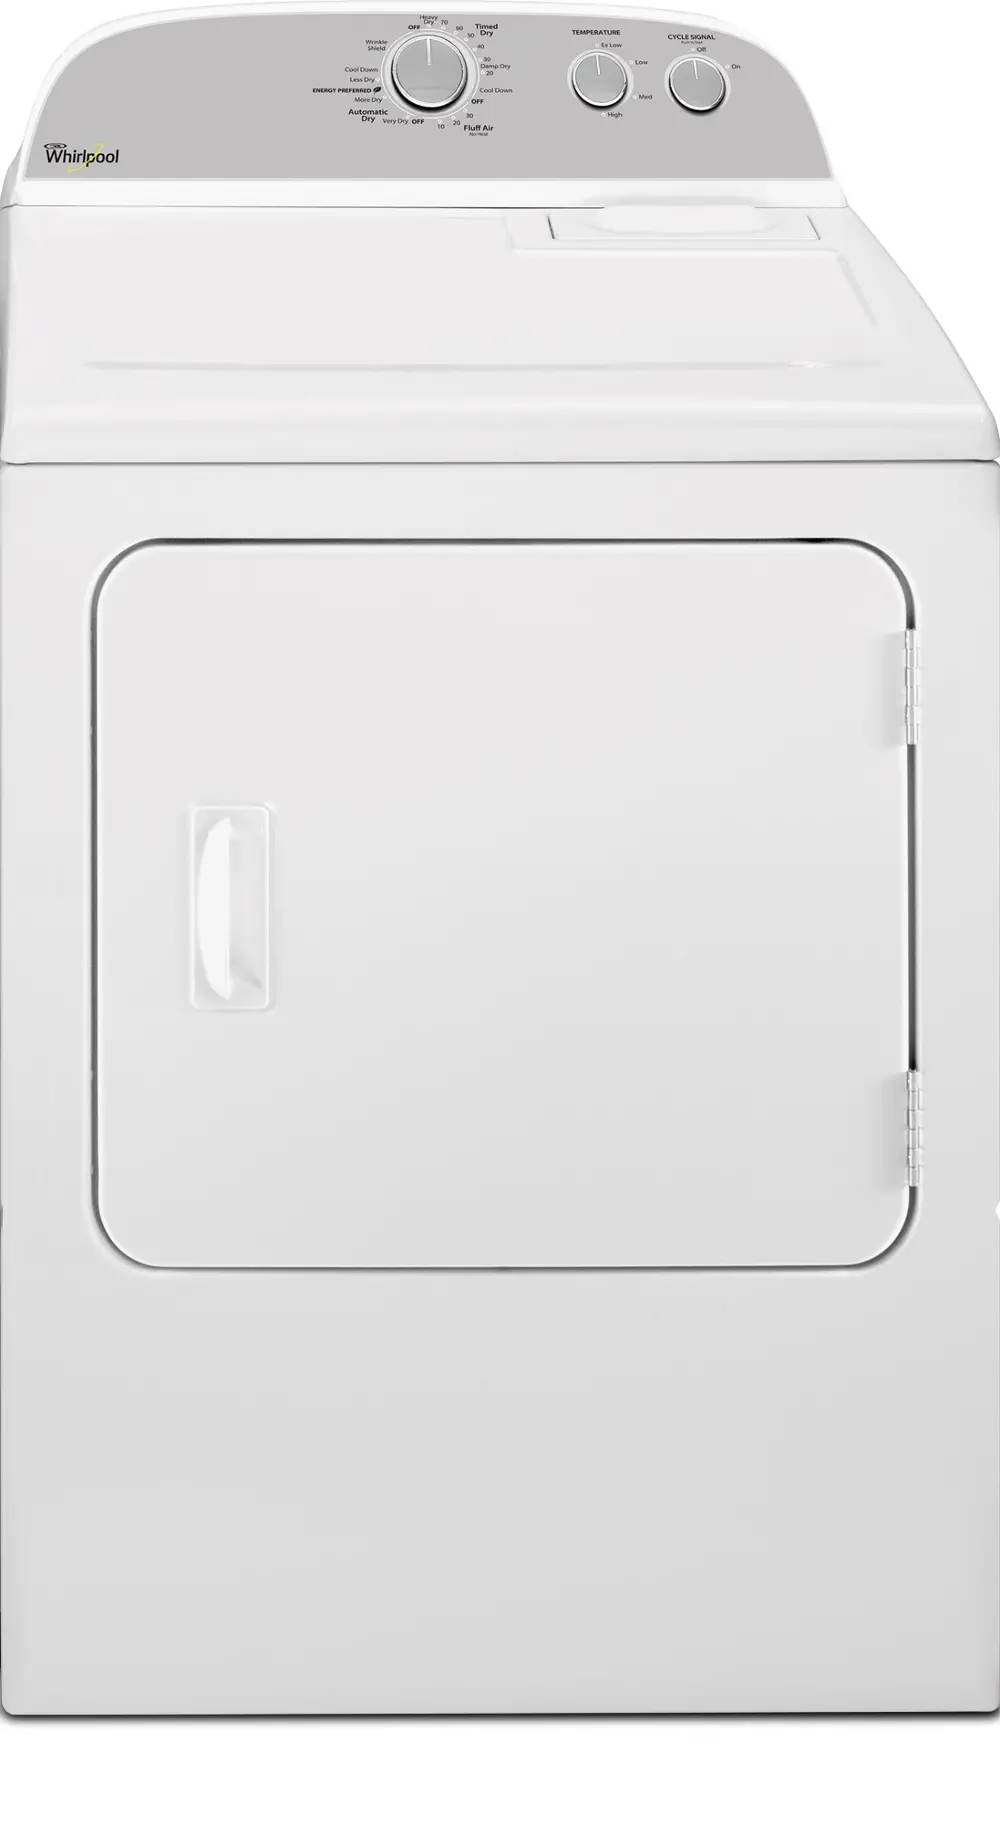 WED4810EW Whirlpool White 7.0 cu. ft. Electric Dryer -1